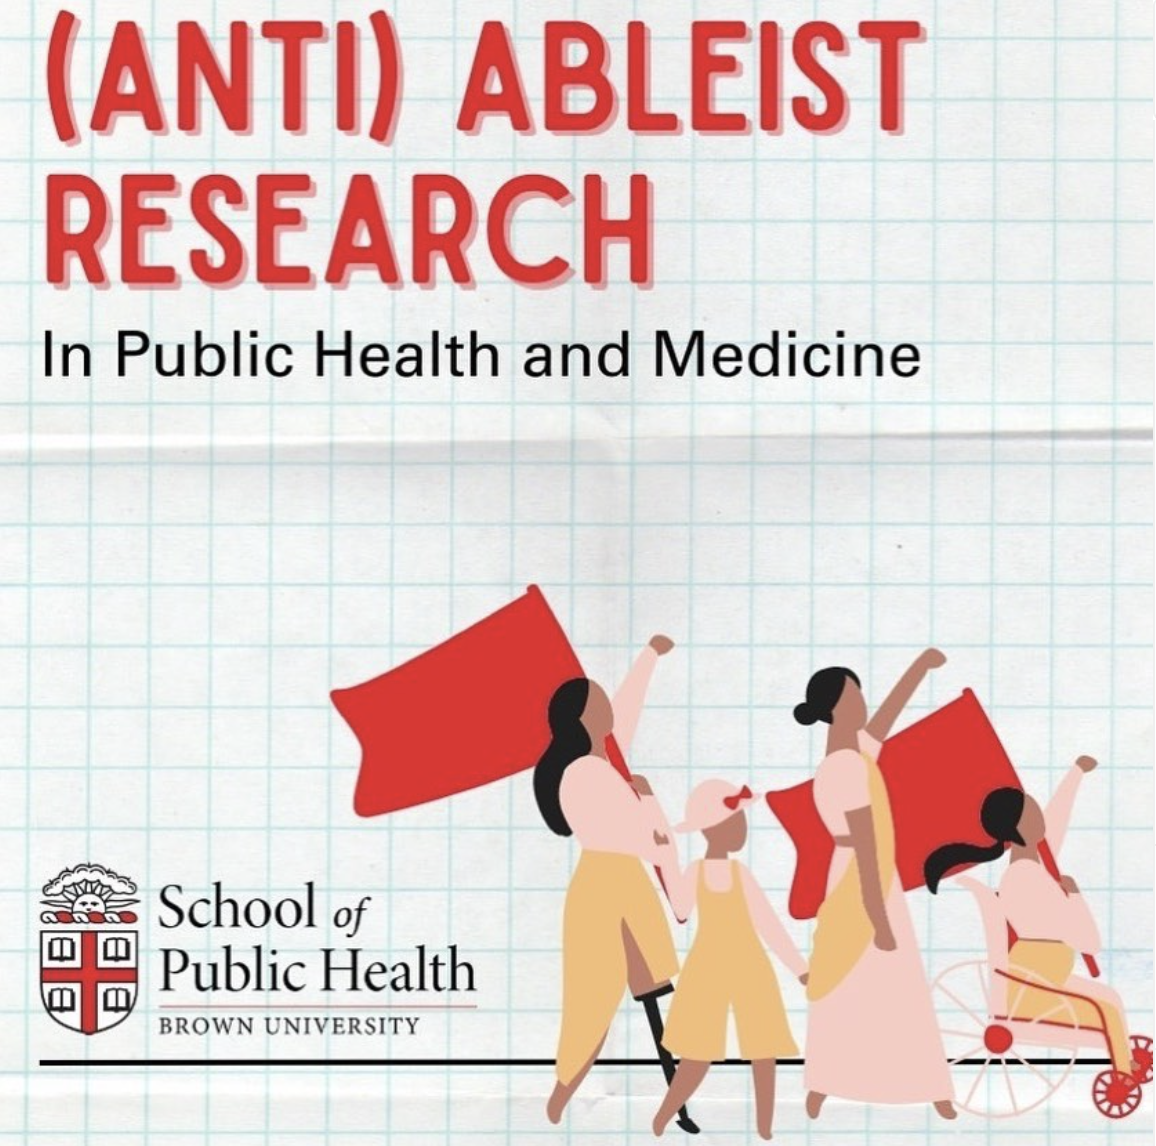 VIDEO: Brown Public Health Panel on Anti Ableist Research